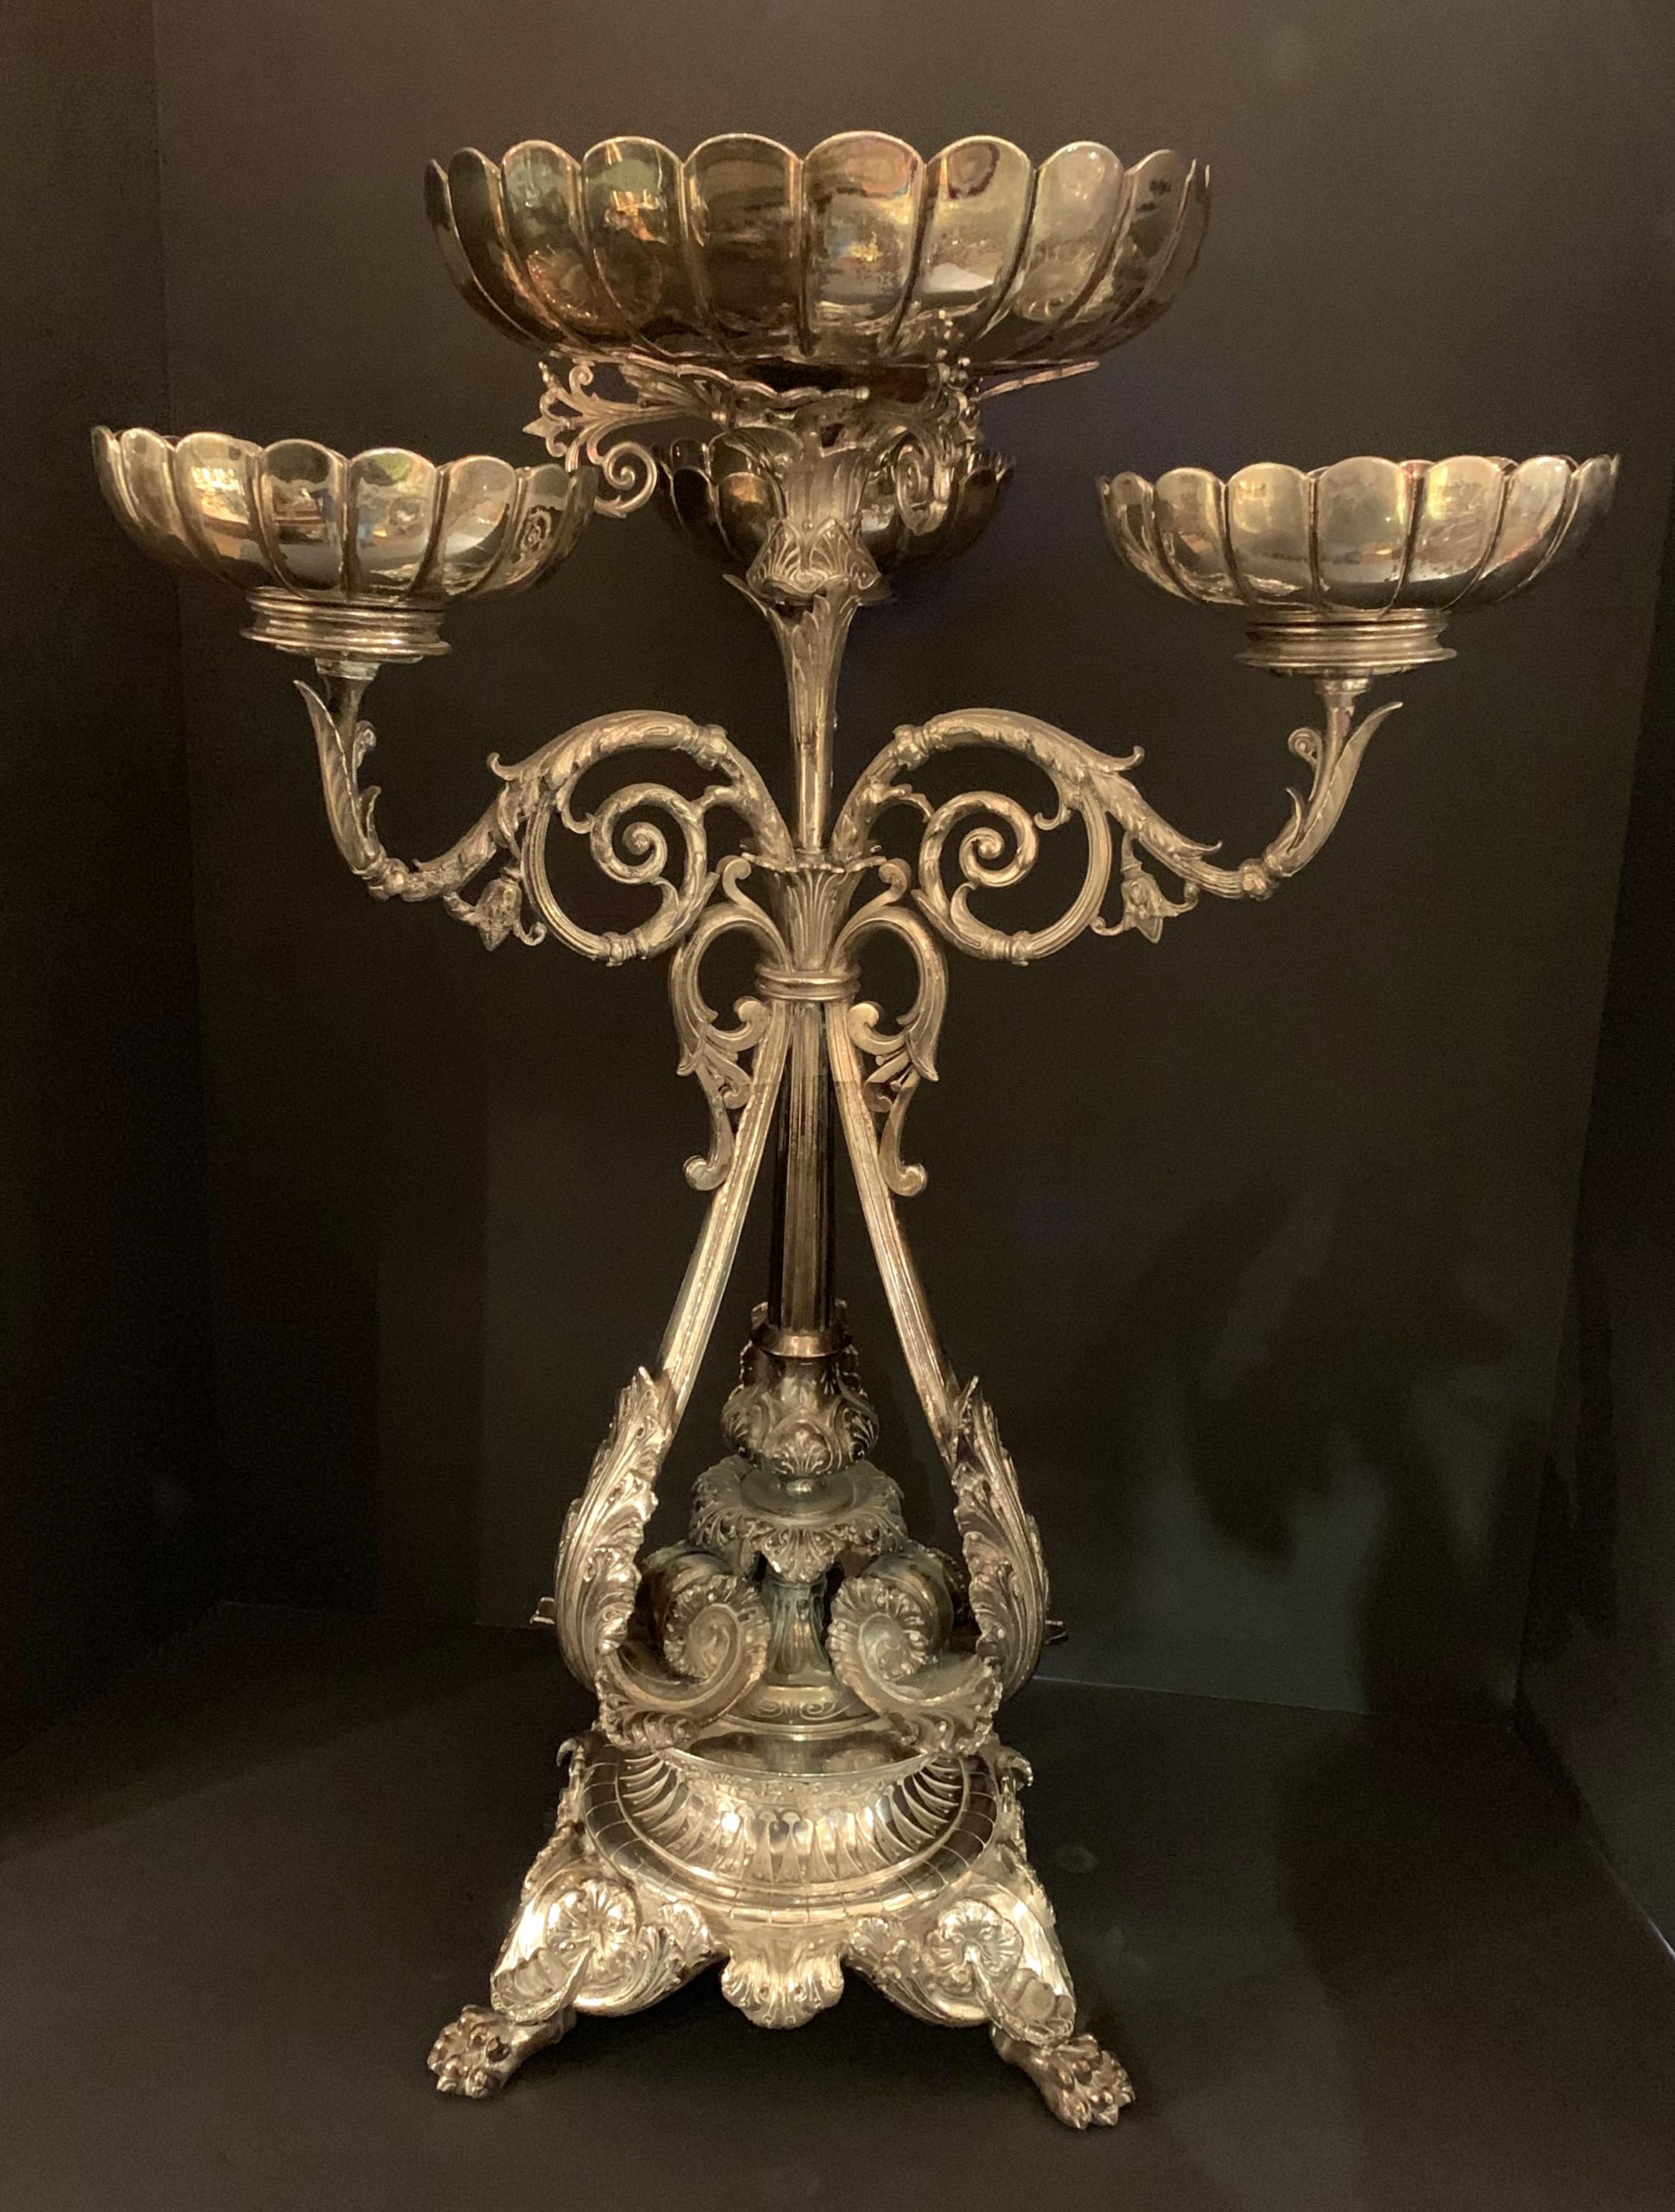 A wonderful English Regency silver plated Epergne by J. Lyons & Co., Elkington Co. with three scalloped bowl surrounding a larger center bowl with very fine heavy chasing.